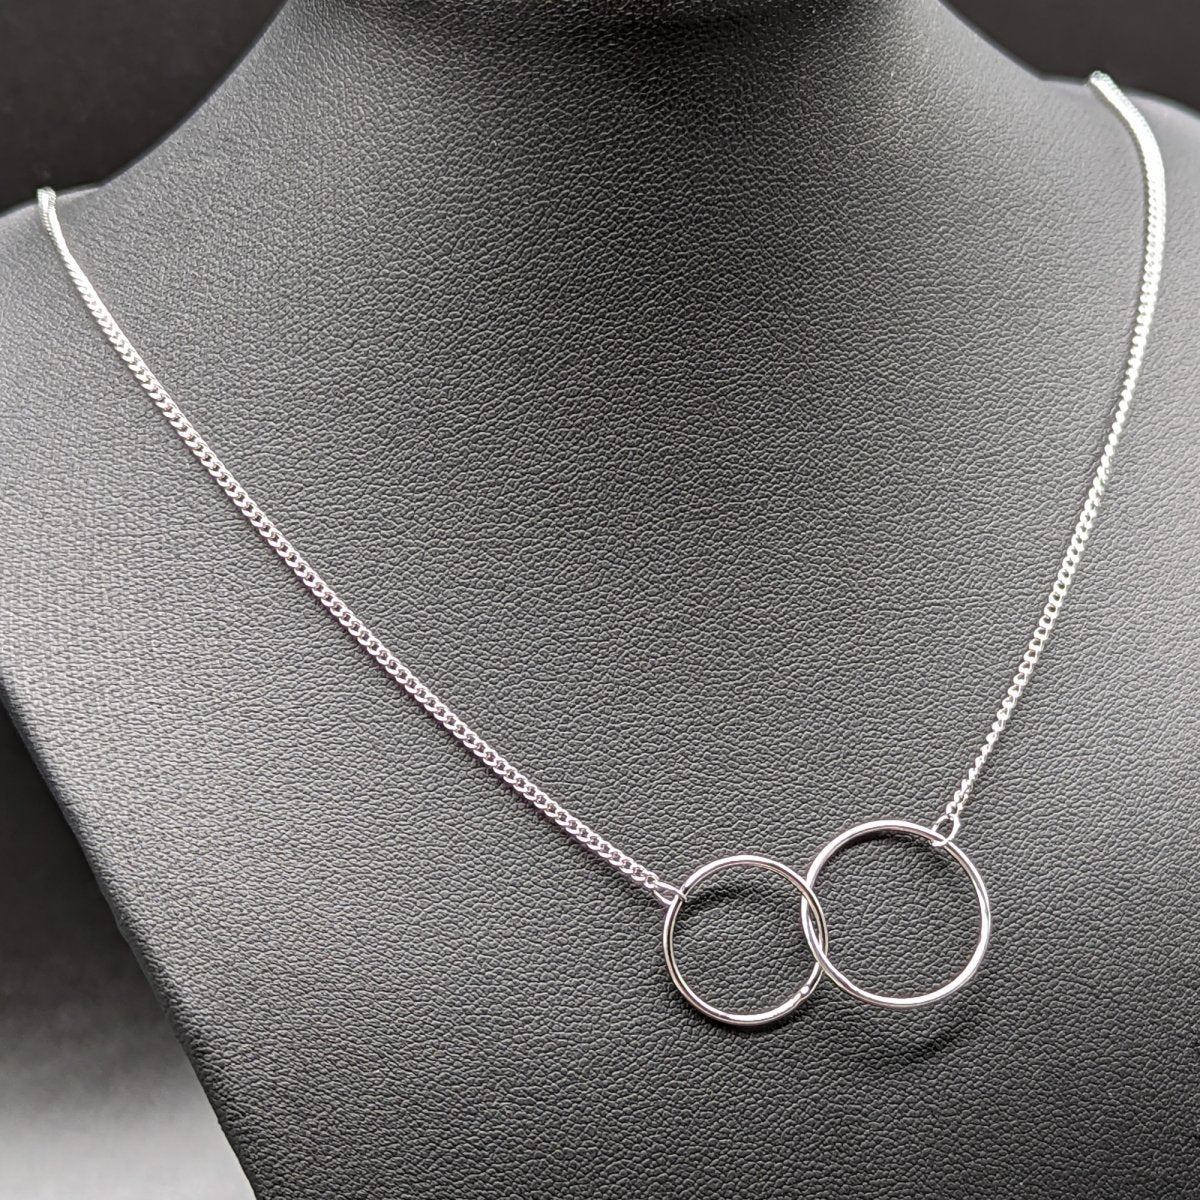 Gift for Wife - Interlocking Circles Necklace - Meaningful Cards